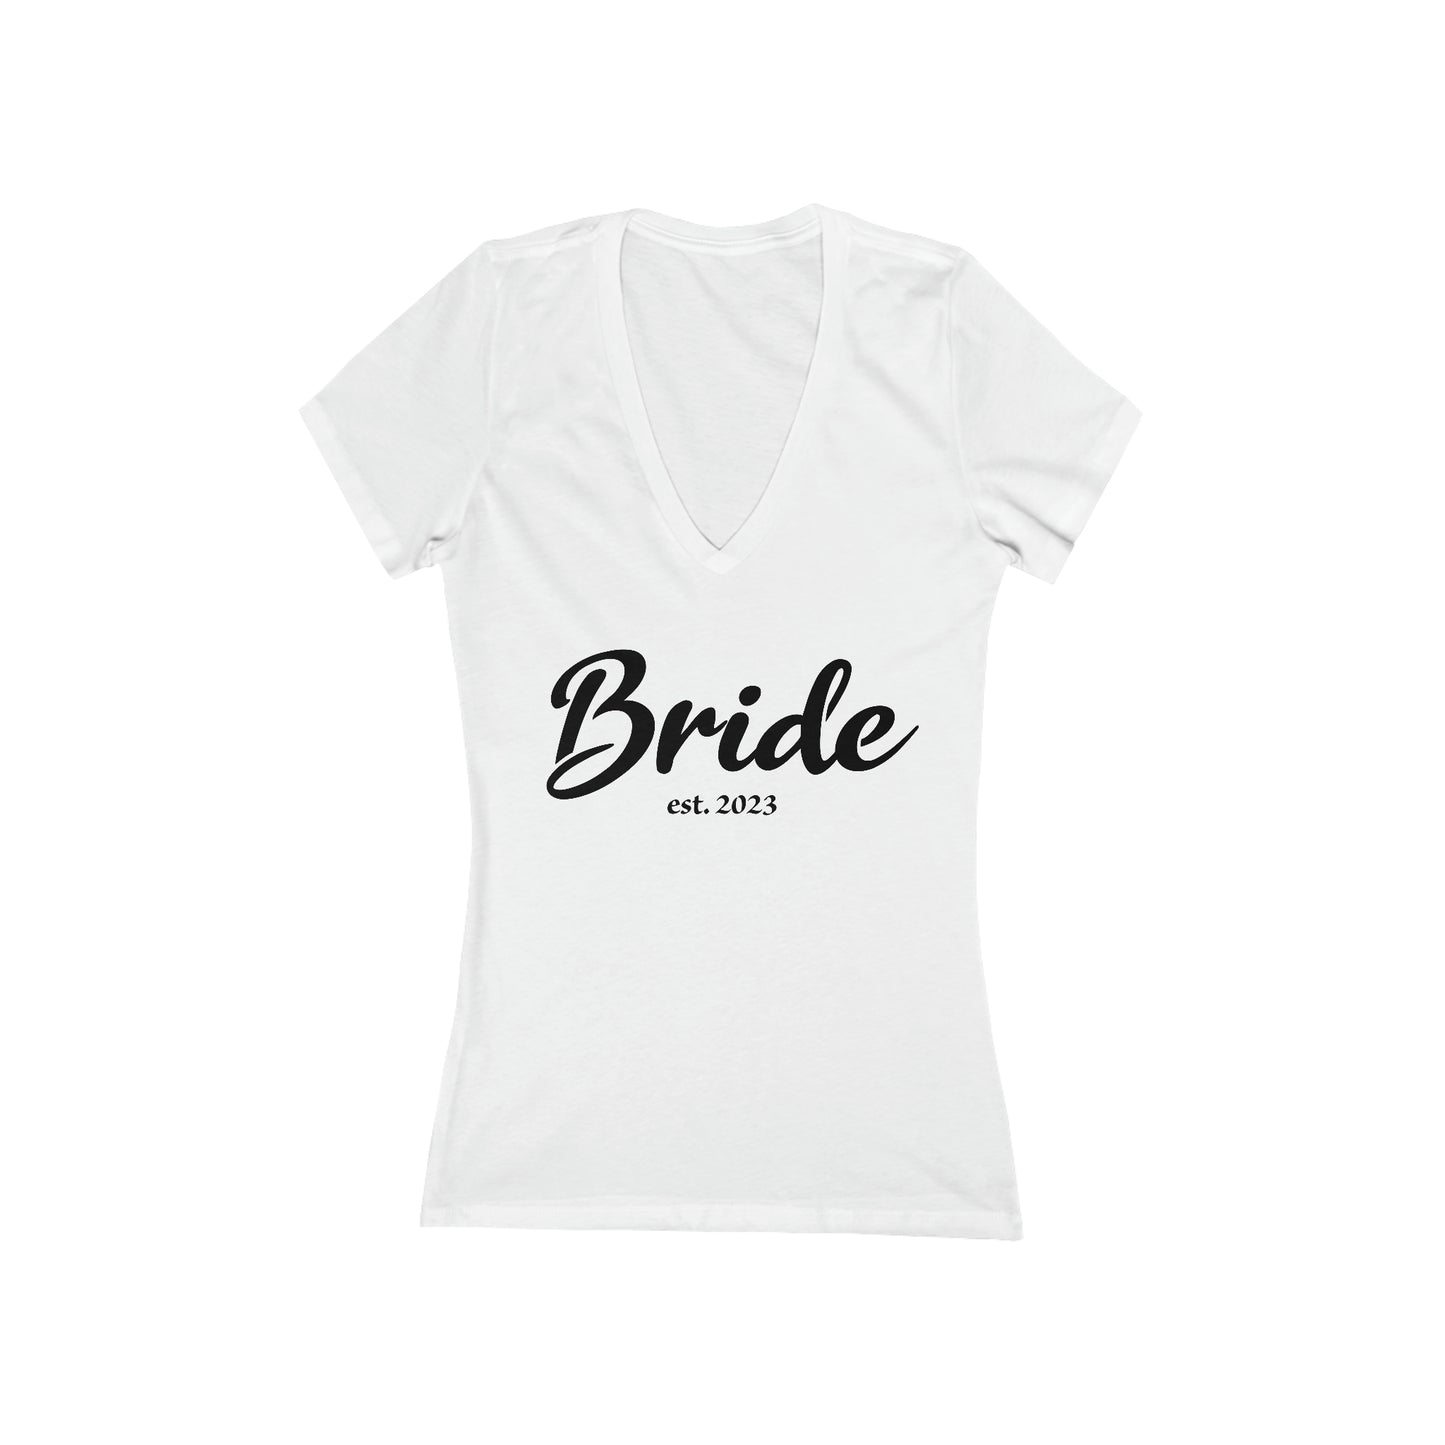 Bride T-Shirt For New Wife TShirt For Honeymoon T Shirt For Matching Shirts For Wedding Couple